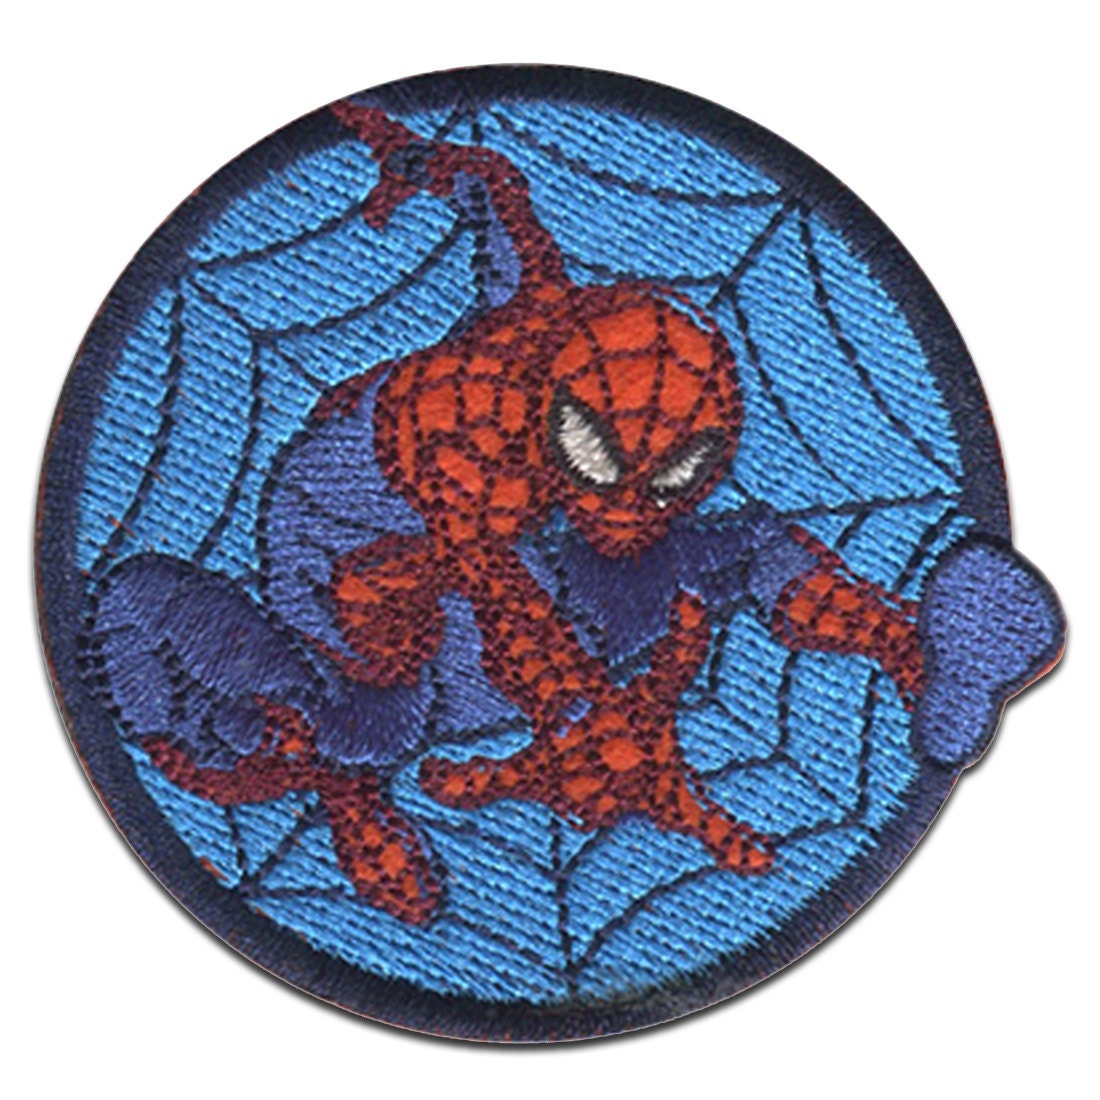 Marvel © Spiderman Comic Spider Web Button Iron on Patches, Size 2,49 X  2,37 Inch 